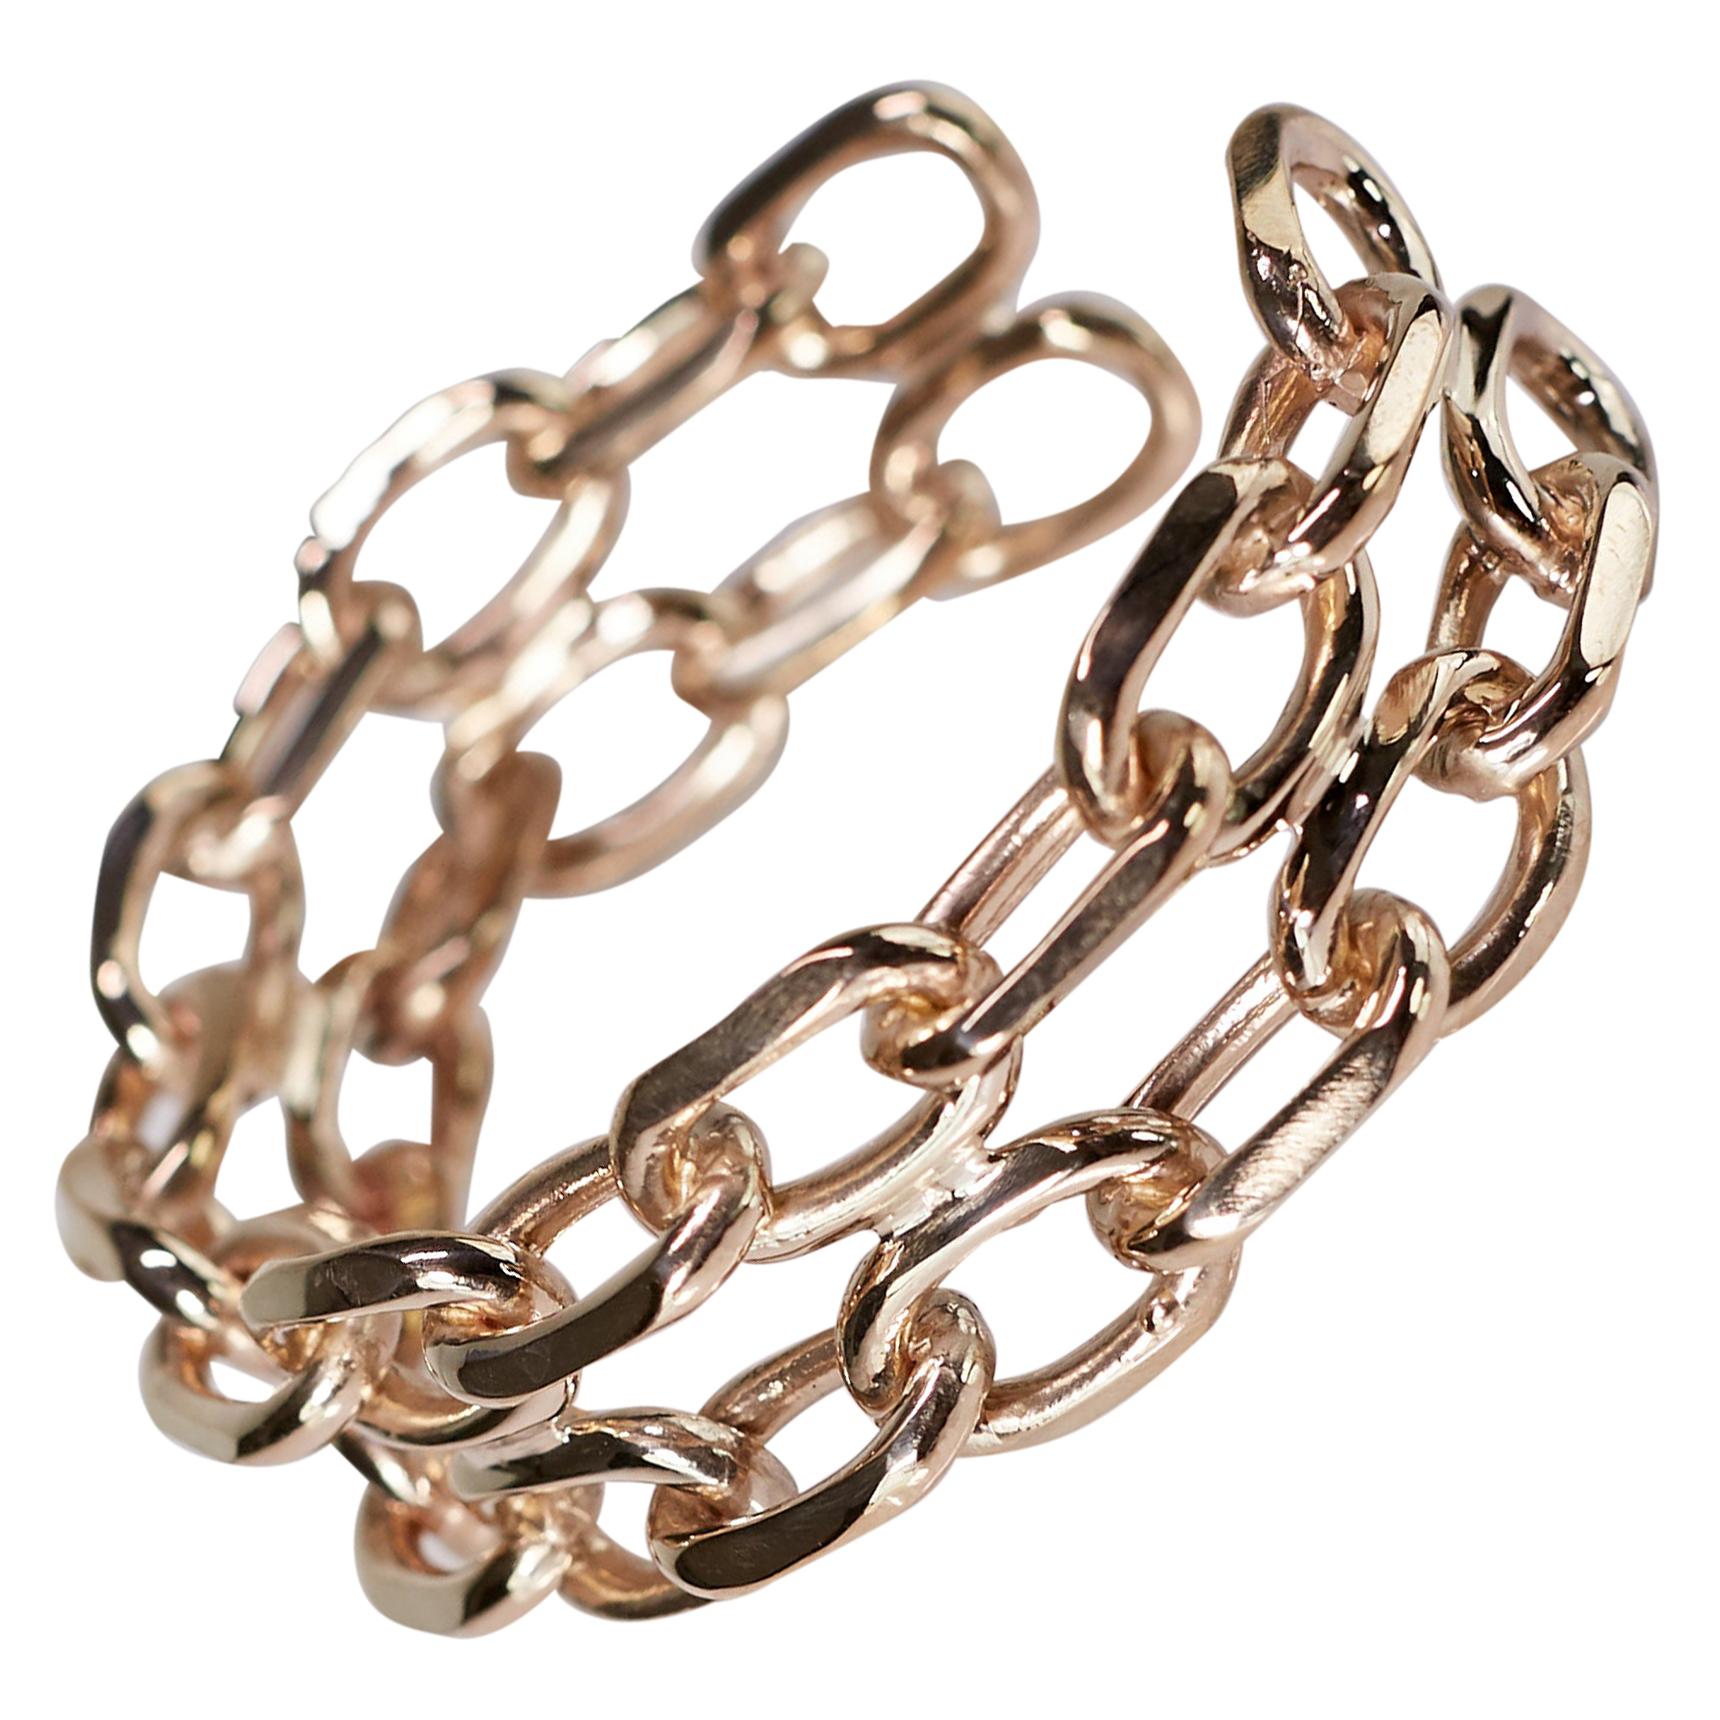 Chain Cuff Bangle Bracelet Gold Plated Brass Statement Piece J Dauphin For Sale